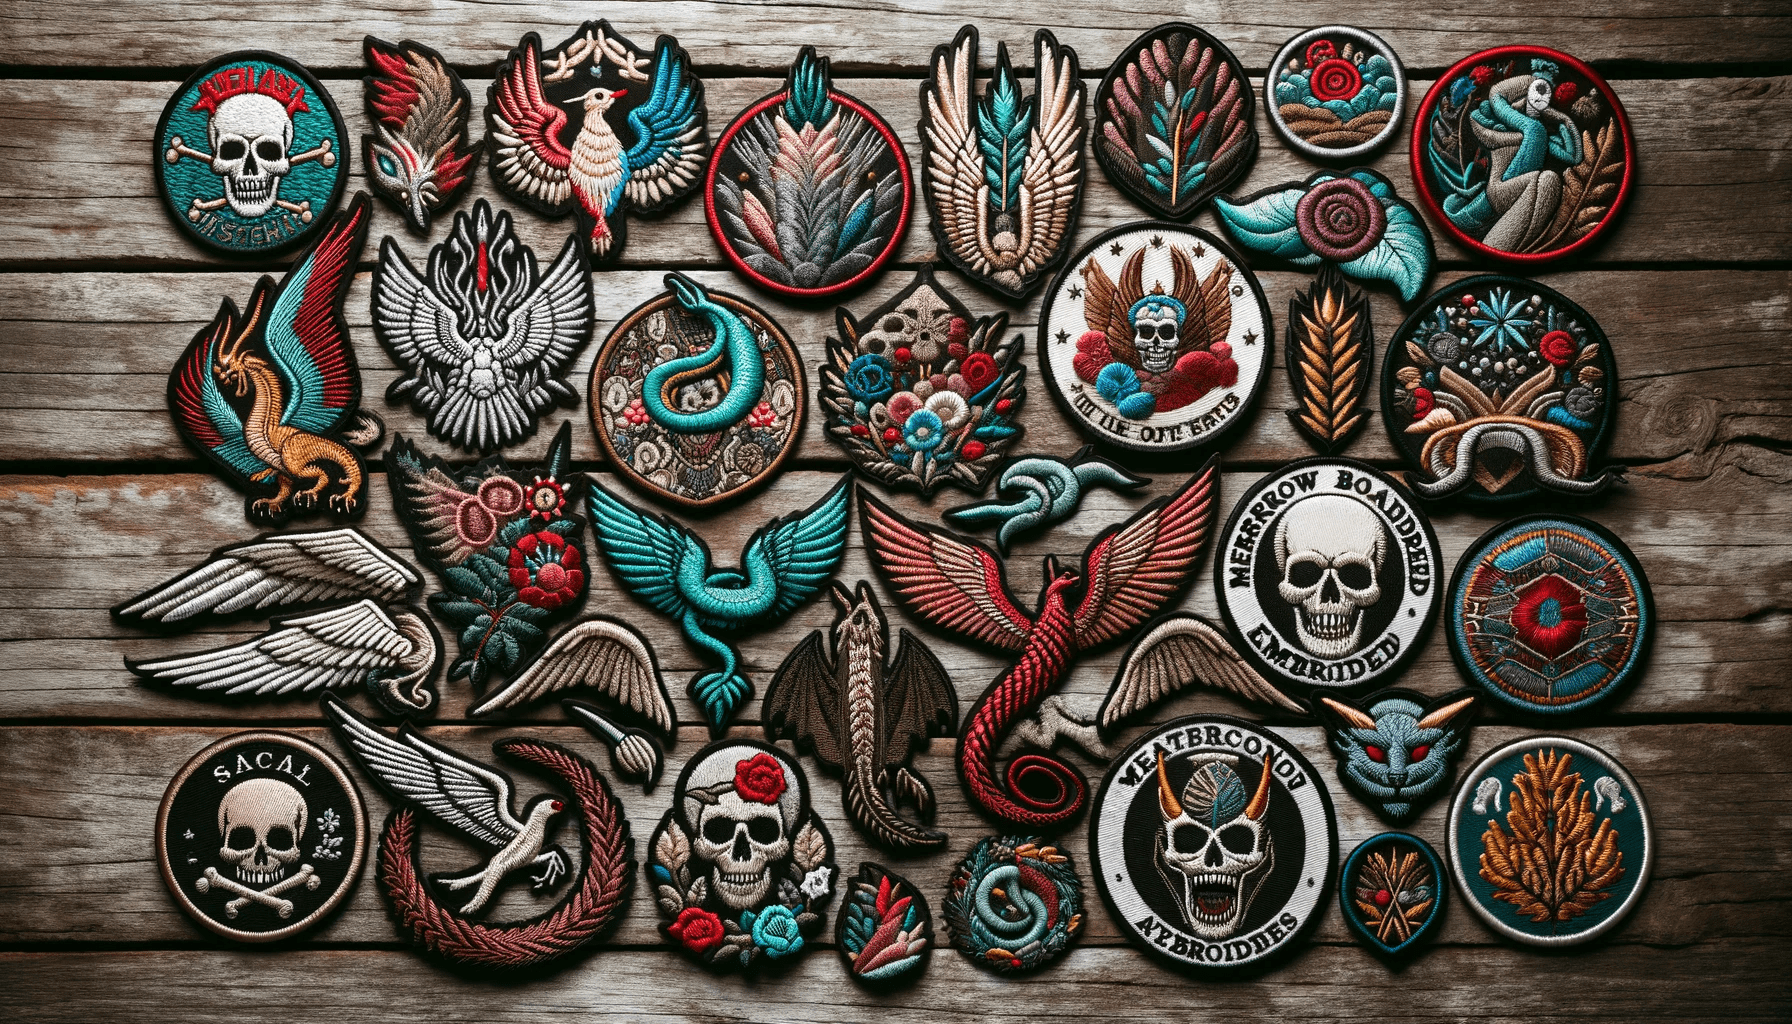 Woven Patches vs Embroidered Patches